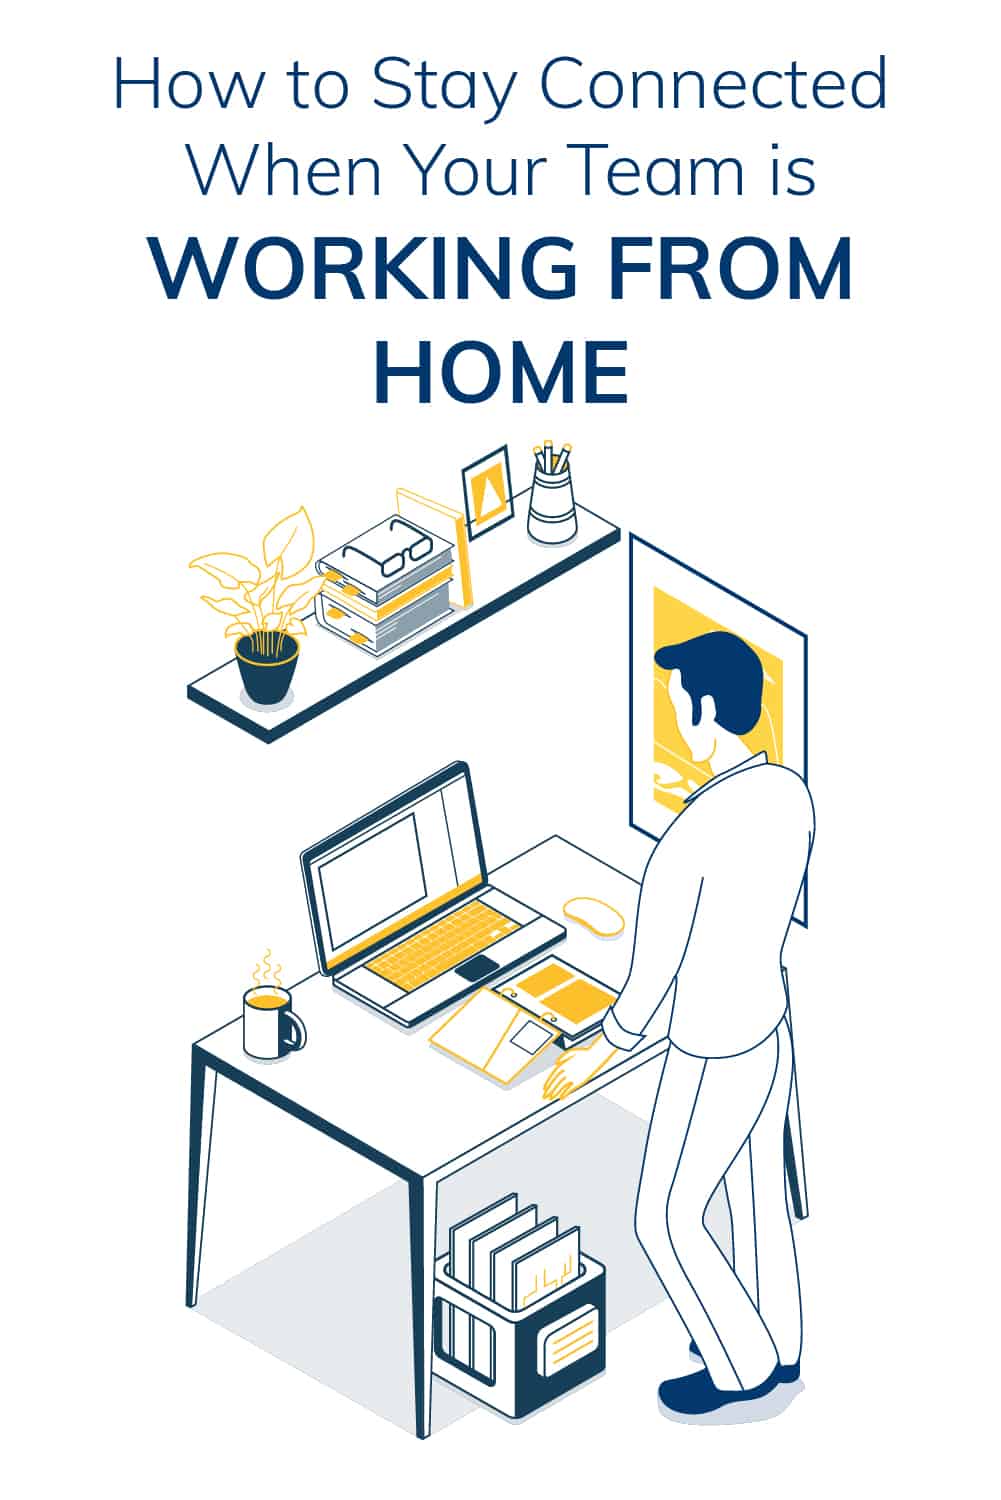 It's become necessary to set up the technology required to allow employees to work from home. Here are some tips to stay connected with your team. via @scopedesign